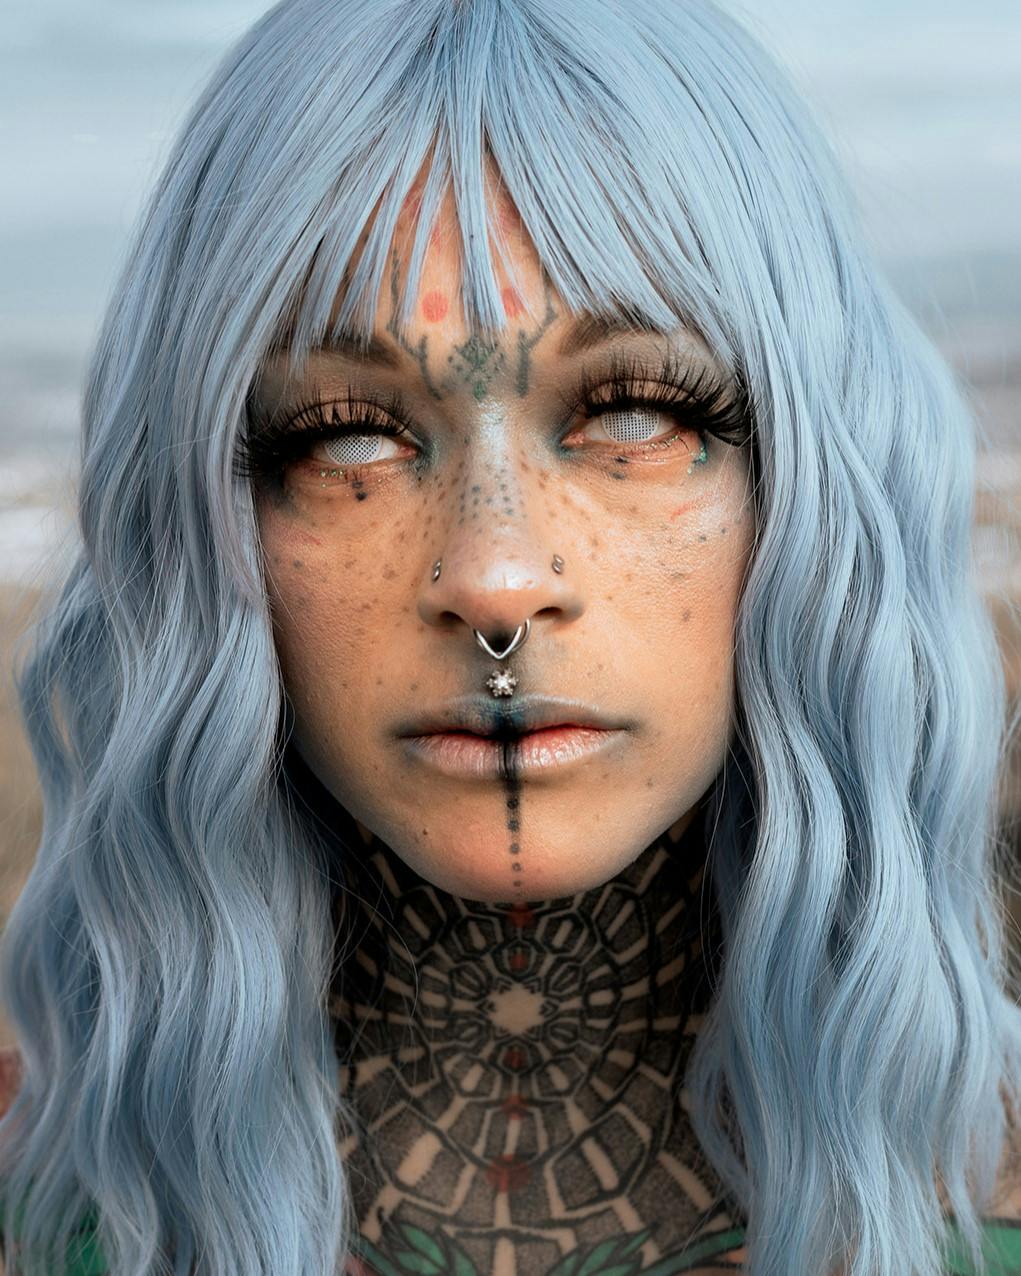 Girl with face tattoos and white hair for a headshot photo.